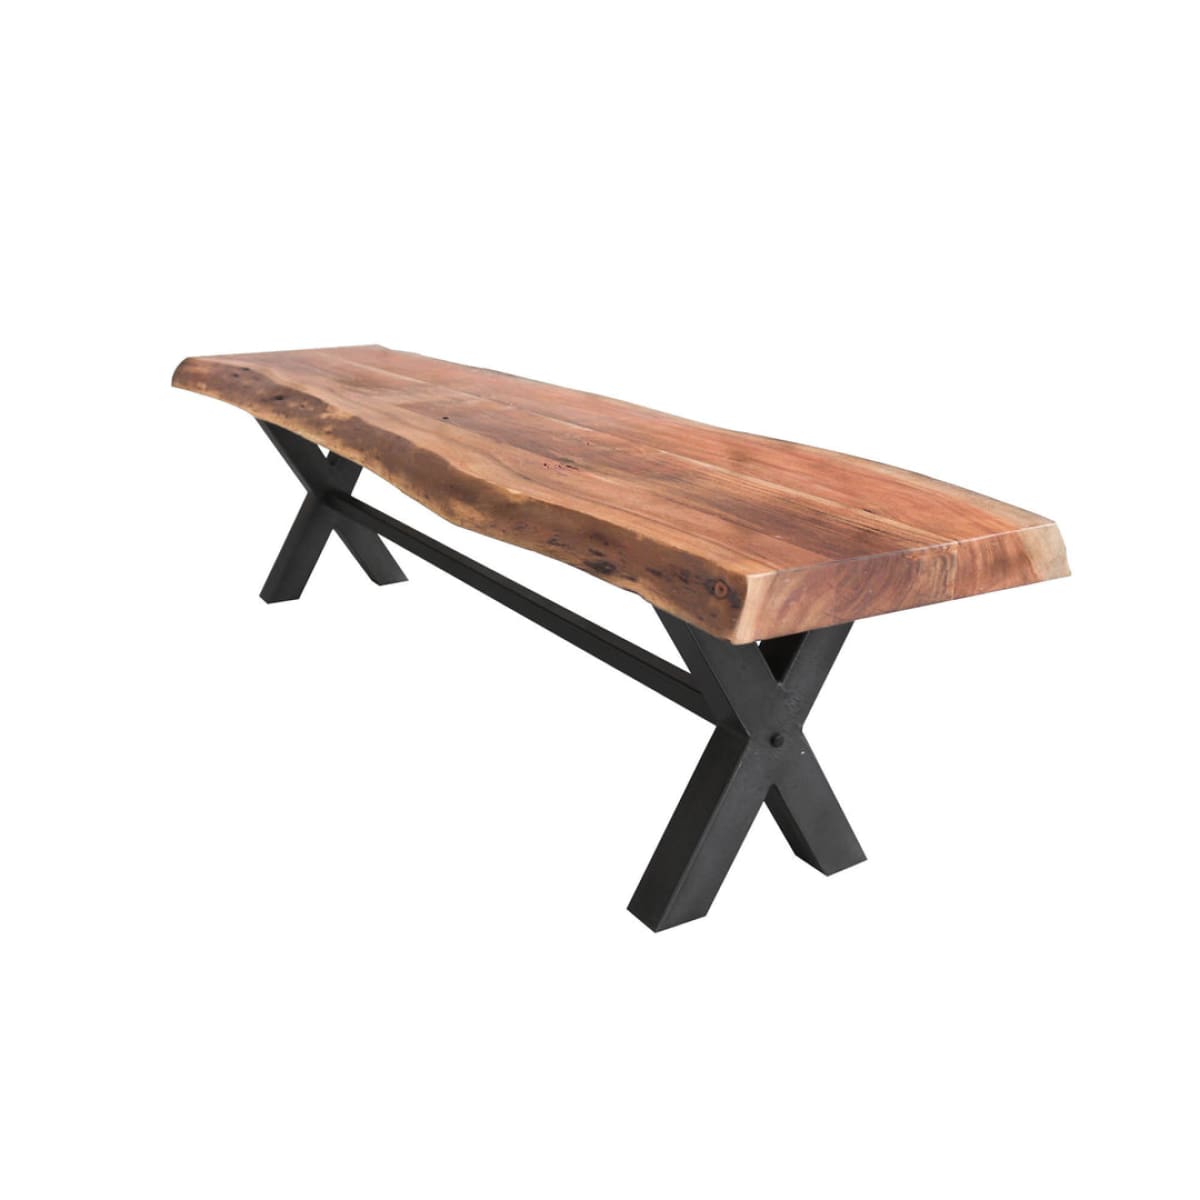 Restore Bench 73 - lh-import-dining-benches